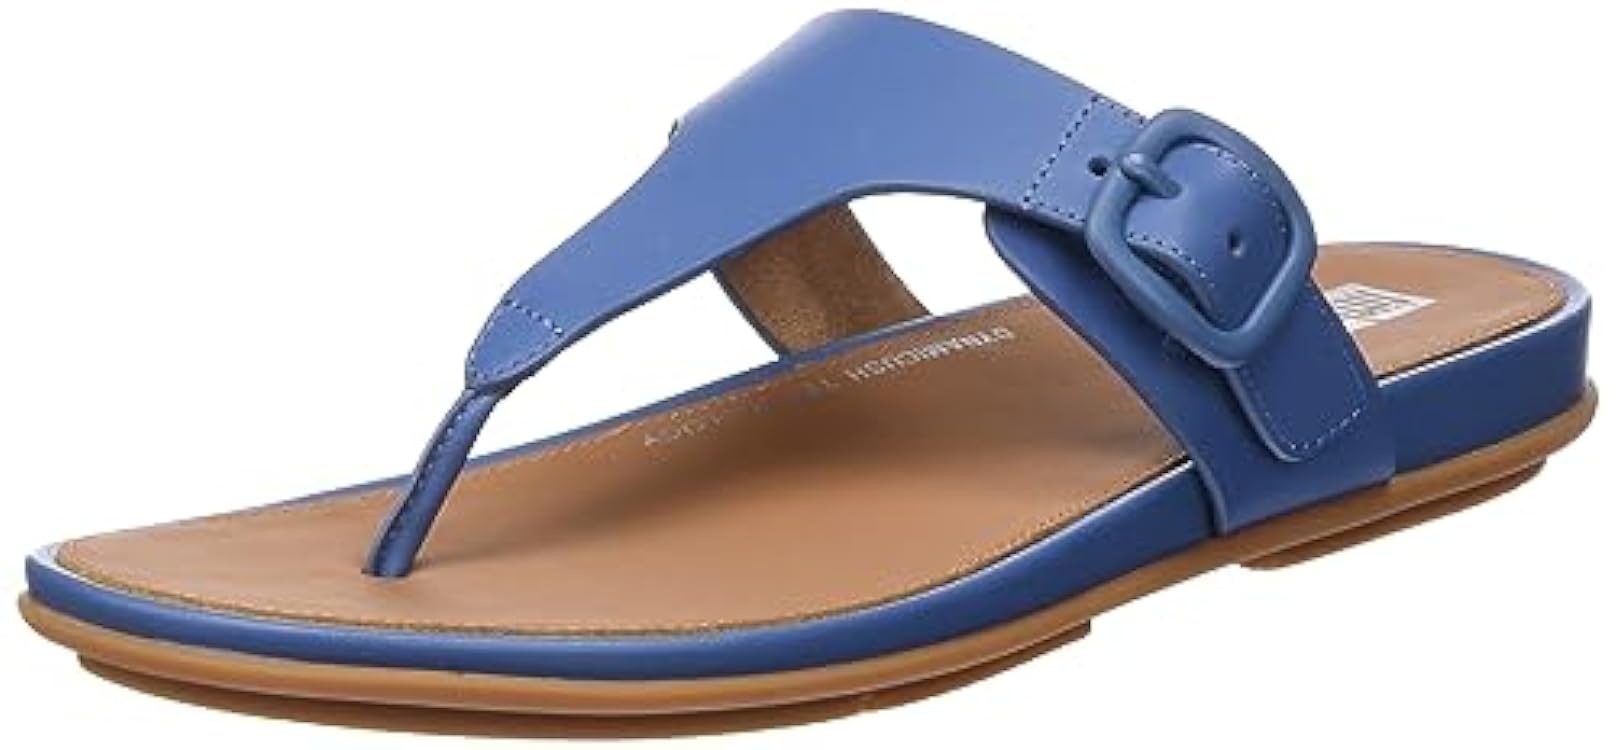 Fitflop Gracie Rubber-Buckle Leather Toe-Post Sandals, 